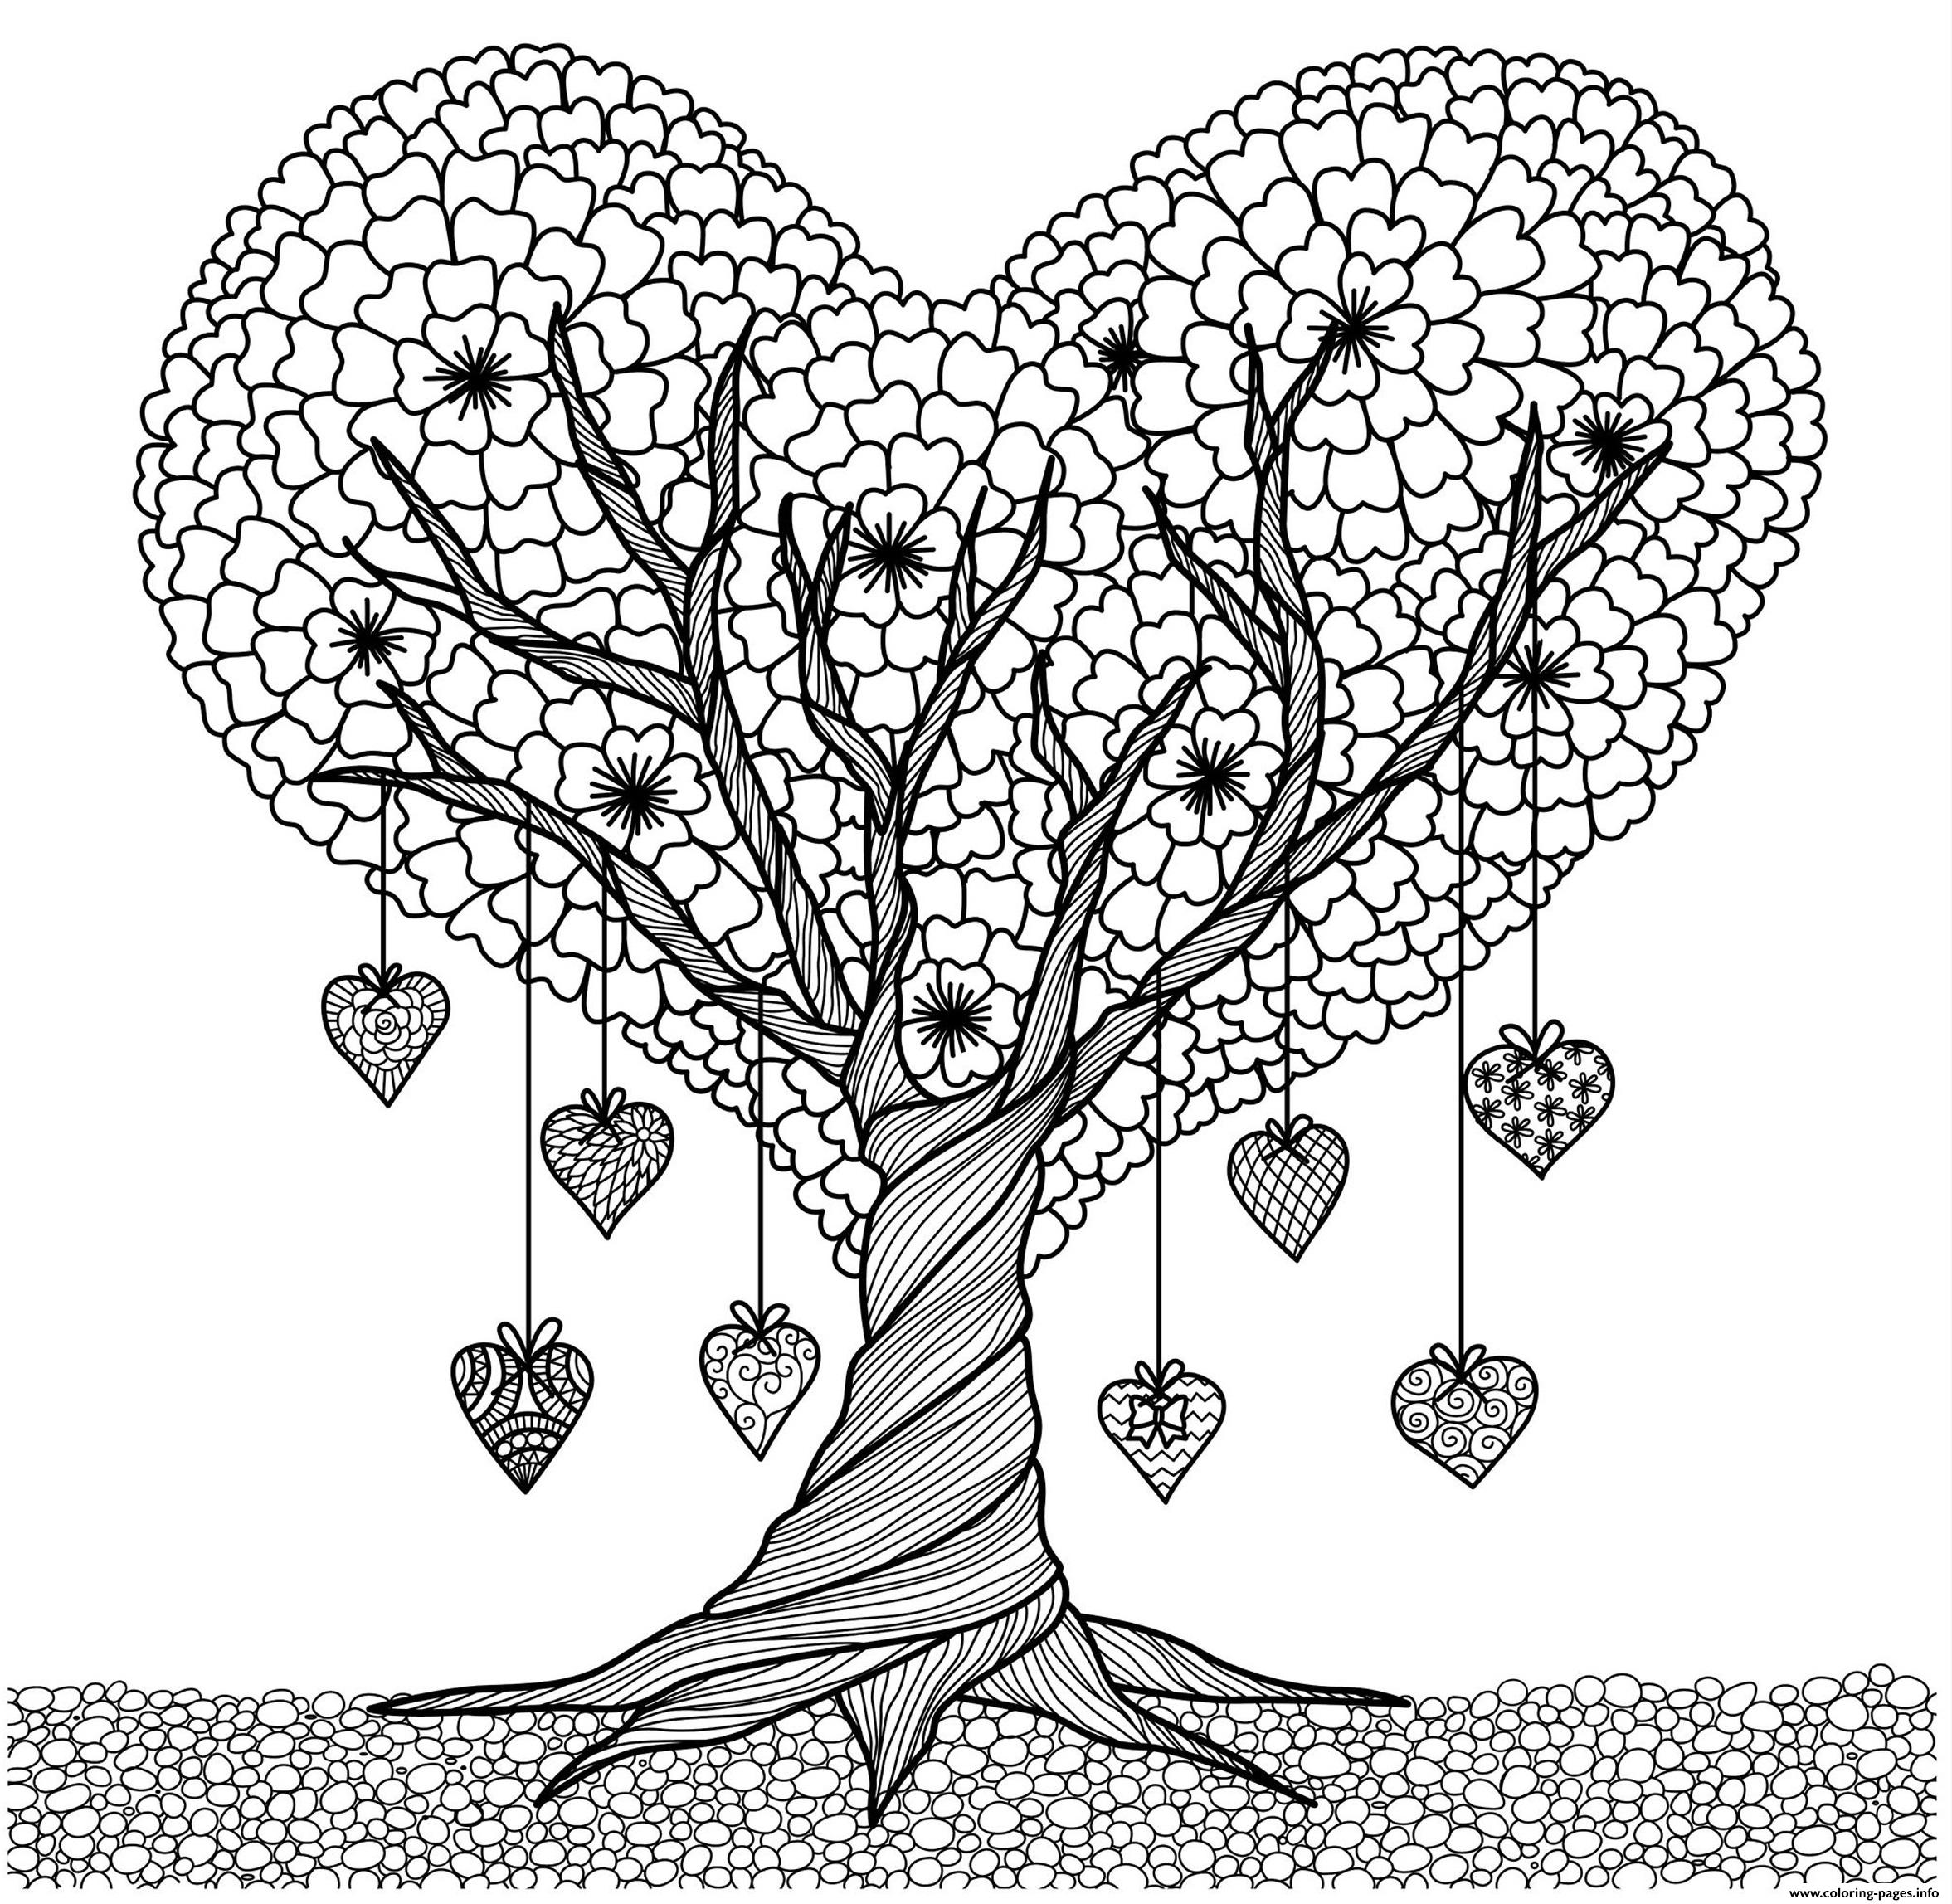 Discover Heart Tree Adults Coloring Pages Printable